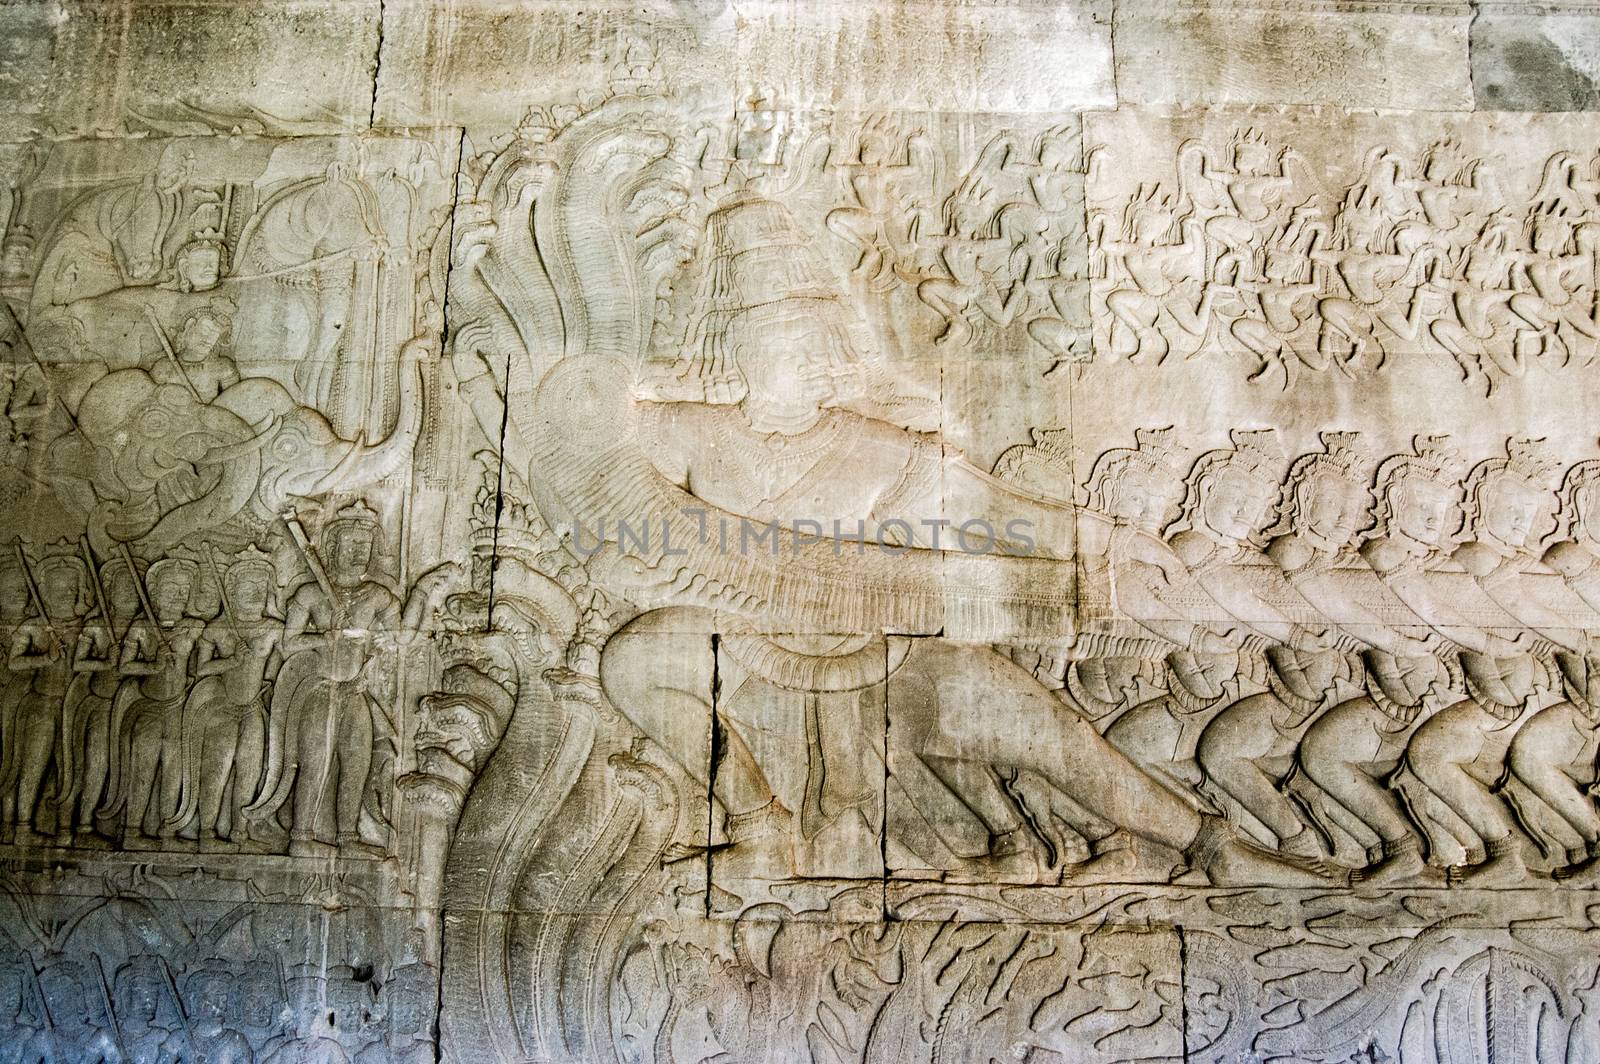 Historic Khmer carving showing the demons pulling on the sacred multi-headed snake known as Vasuki. Hindu legend, the Churning of the Ocean of Milk, bas relief at Angkor Wat temple, Cambodia.